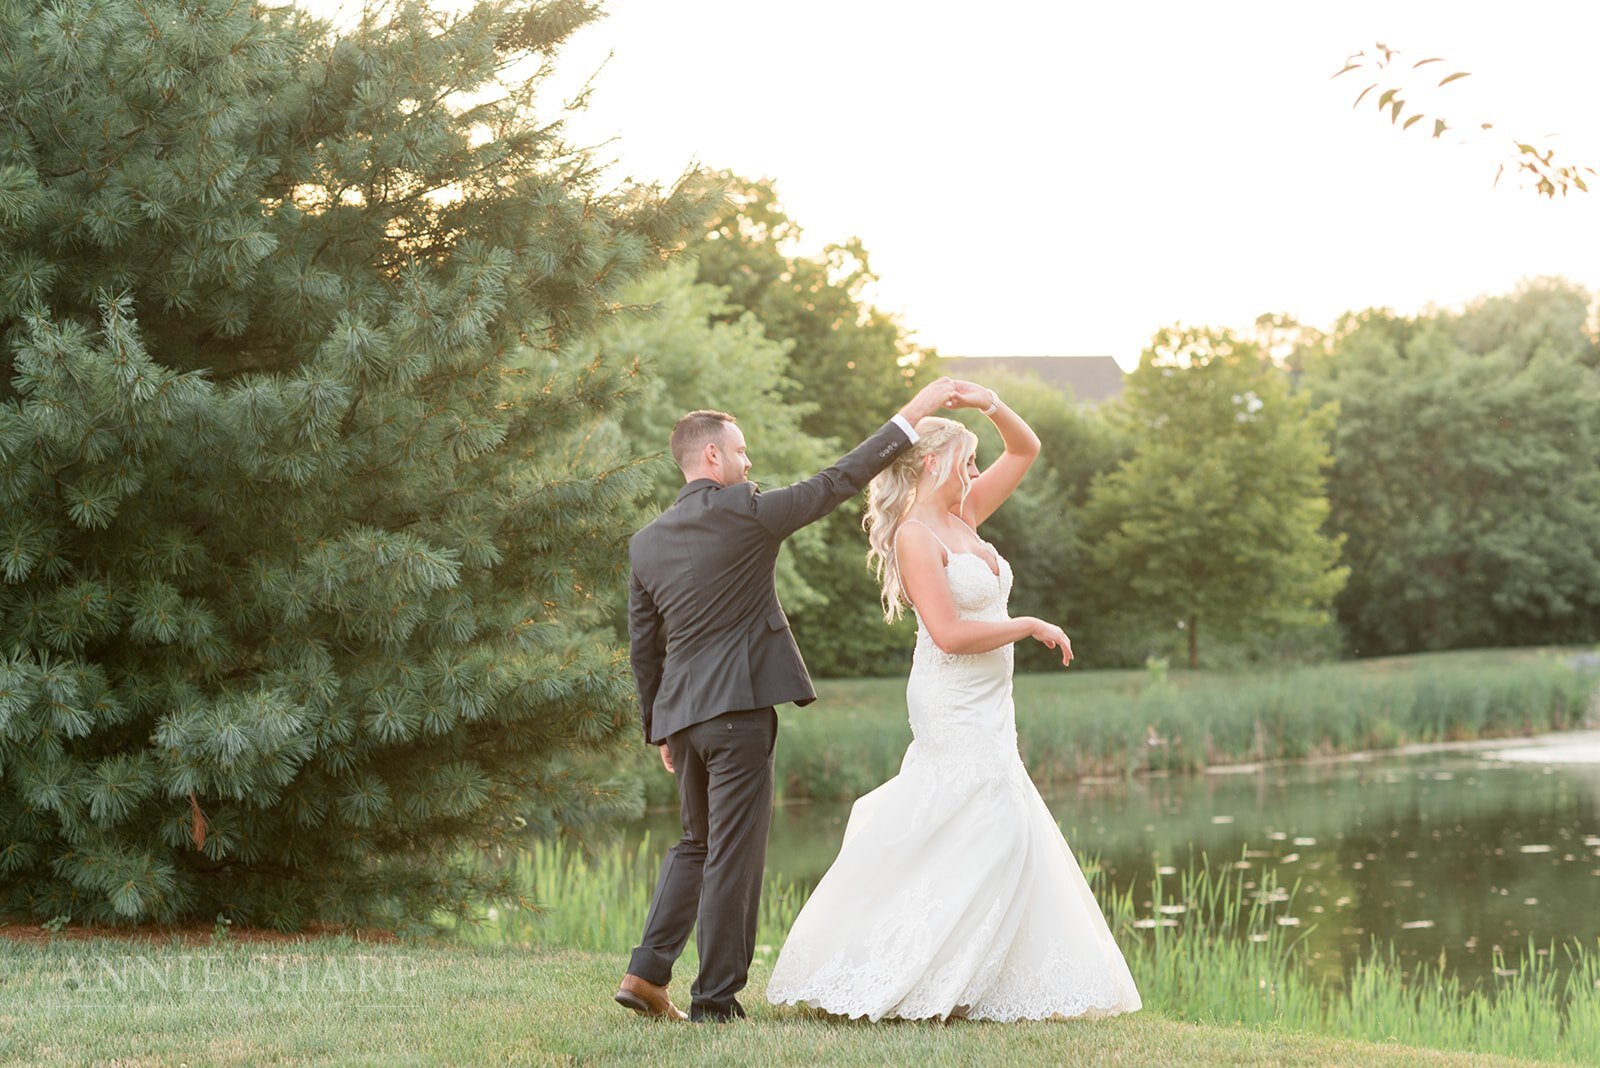 Amber and Doctor Matthew's intimate Wedding at Melhorn Manor